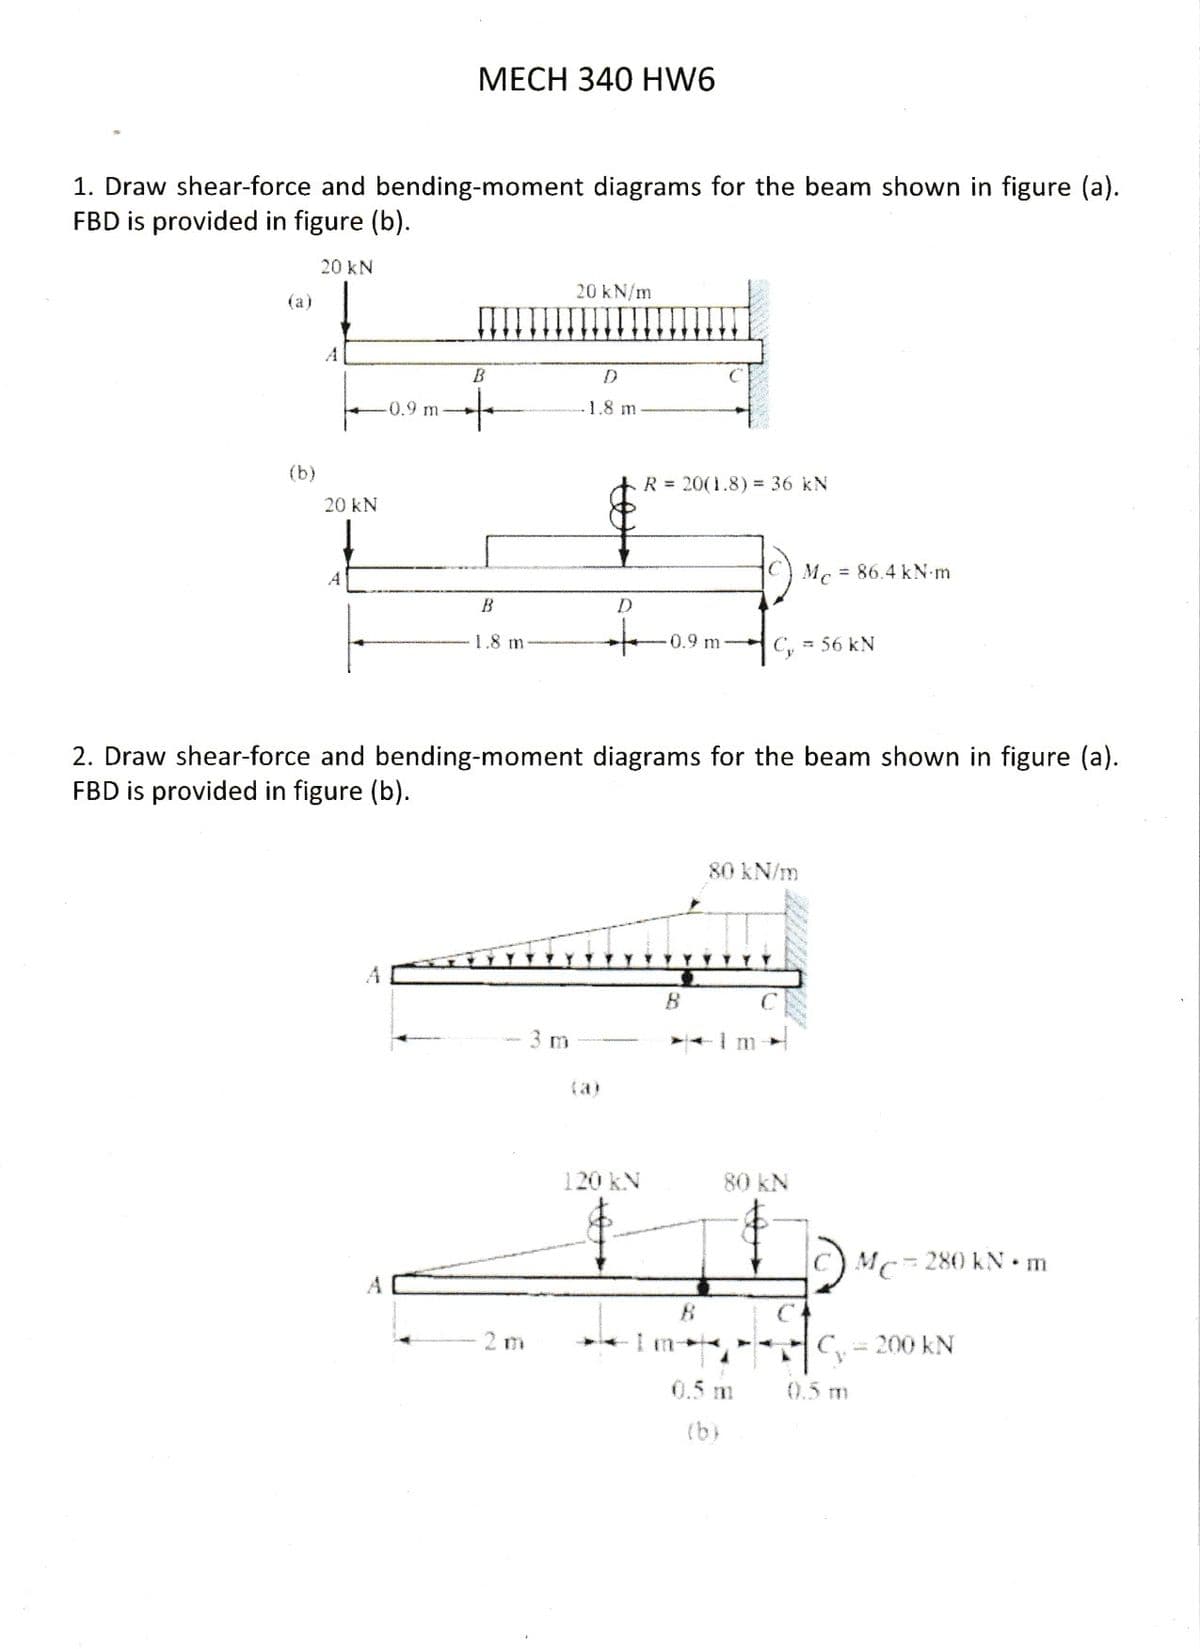 1. Draw shear-force and bending-moment diagrams for the beam shown in figure (a).
FBD is provided in figure (b).
20 KN
(a)
(b)
20 kN
A
MECH 340 HW6
-0.9 m-
A
B
B
1.8 m
20 kN/m
3 m
D
1.8 m
D
(a)
R = 20(1.8) = 36 kN
2. Draw shear-force and bending-moment diagrams for the beam shown in figure (a).
FBD is provided in figure (b).
120 kN
0.9 m-
1
B
B
Cy = 56 kN
80 kN/m
Mc = 86.4 kN-m
80 kN
0.5 m
(b)
MC=
-= 280 kN • m
0.5 m
C₂ - 200 KN